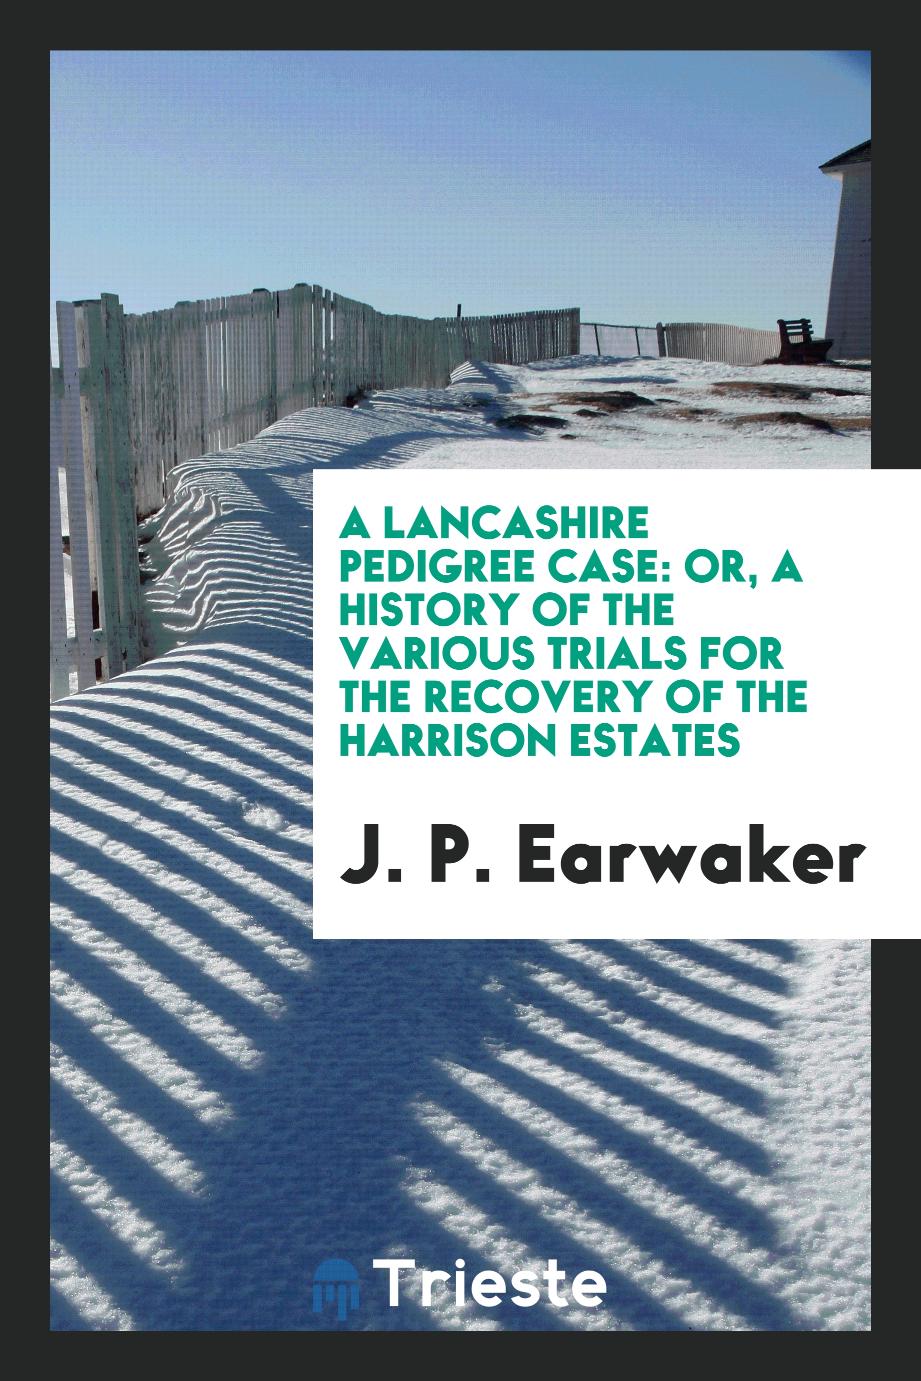 A Lancashire Pedigree Case: Or, A History of the Various Trials for the Recovery of the Harrison Estates